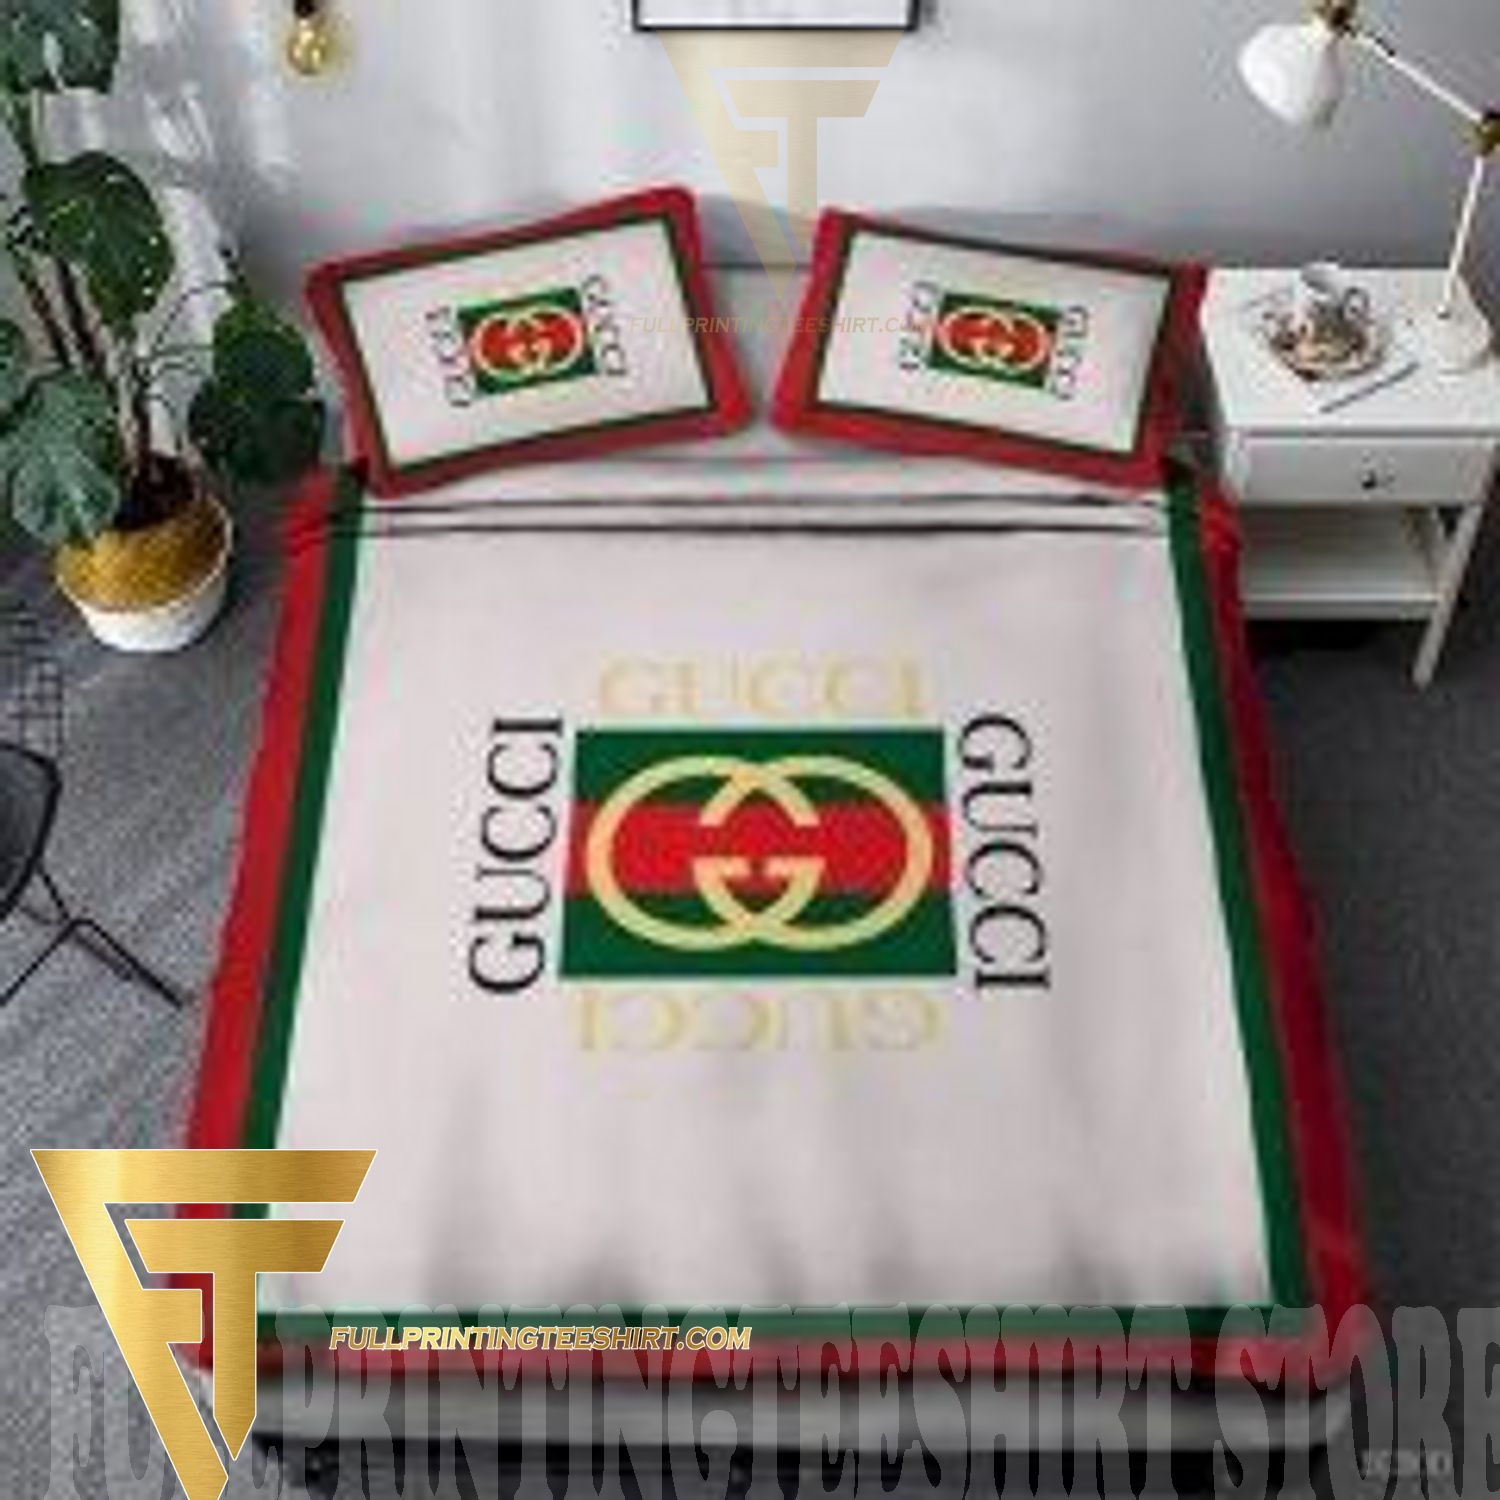 Top-selling item] Gucci 20 Bedding Sets Bedroom Luxury Brand Bedding